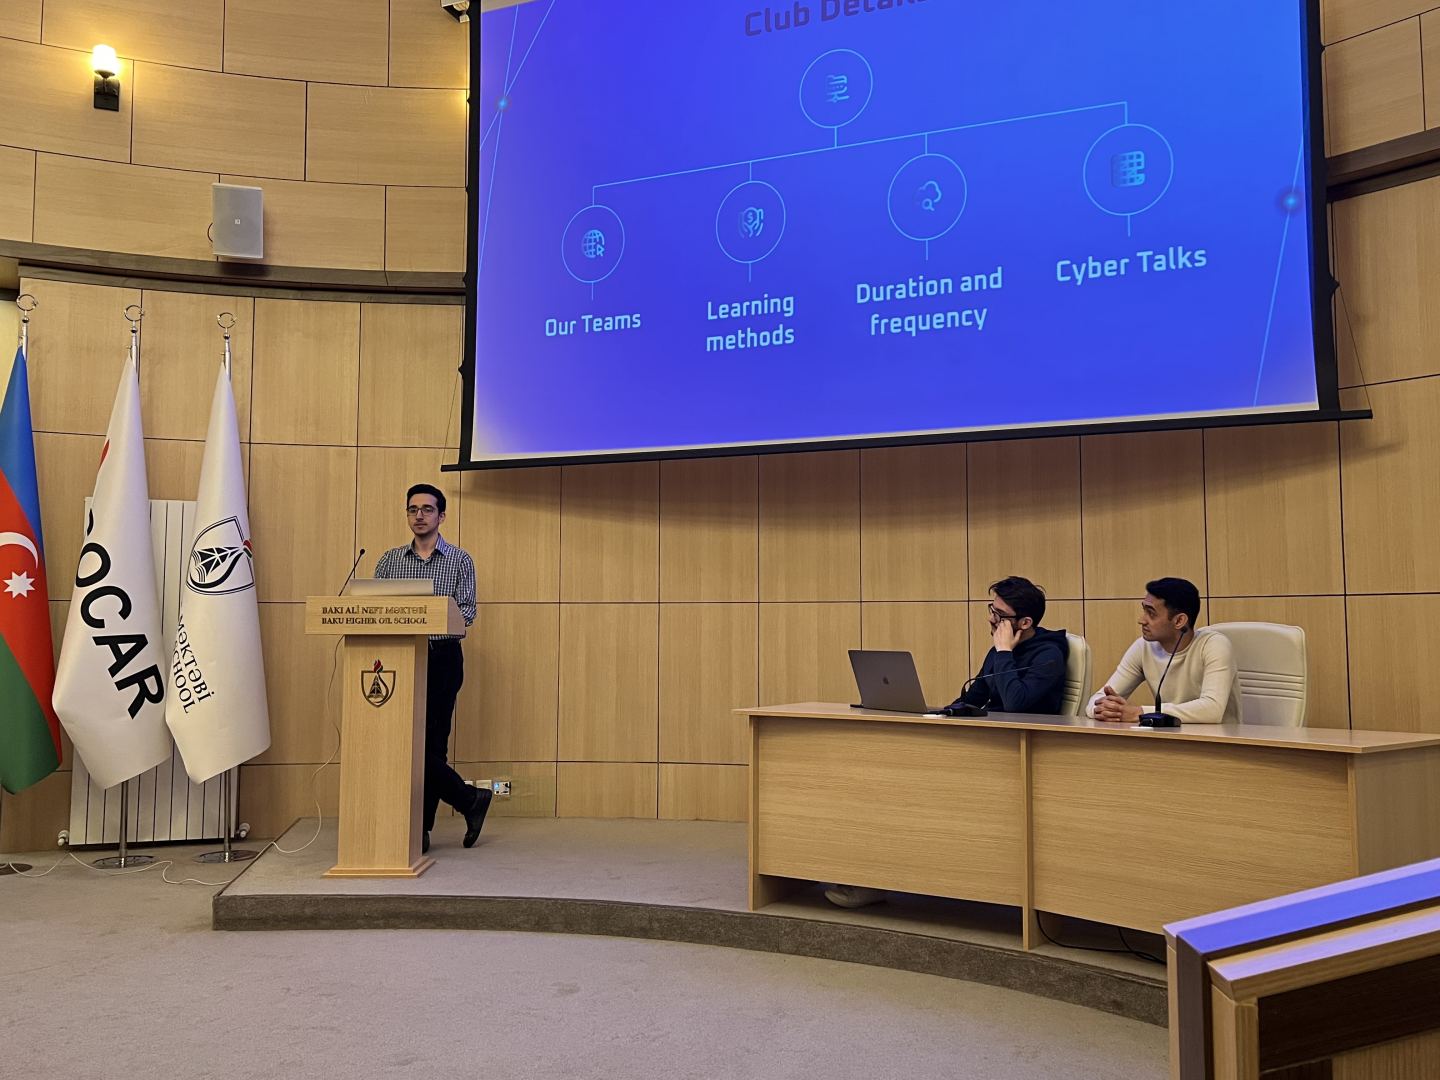 Cyber club has been created for the first time among the universities in Azerbaijan (PHOTO)